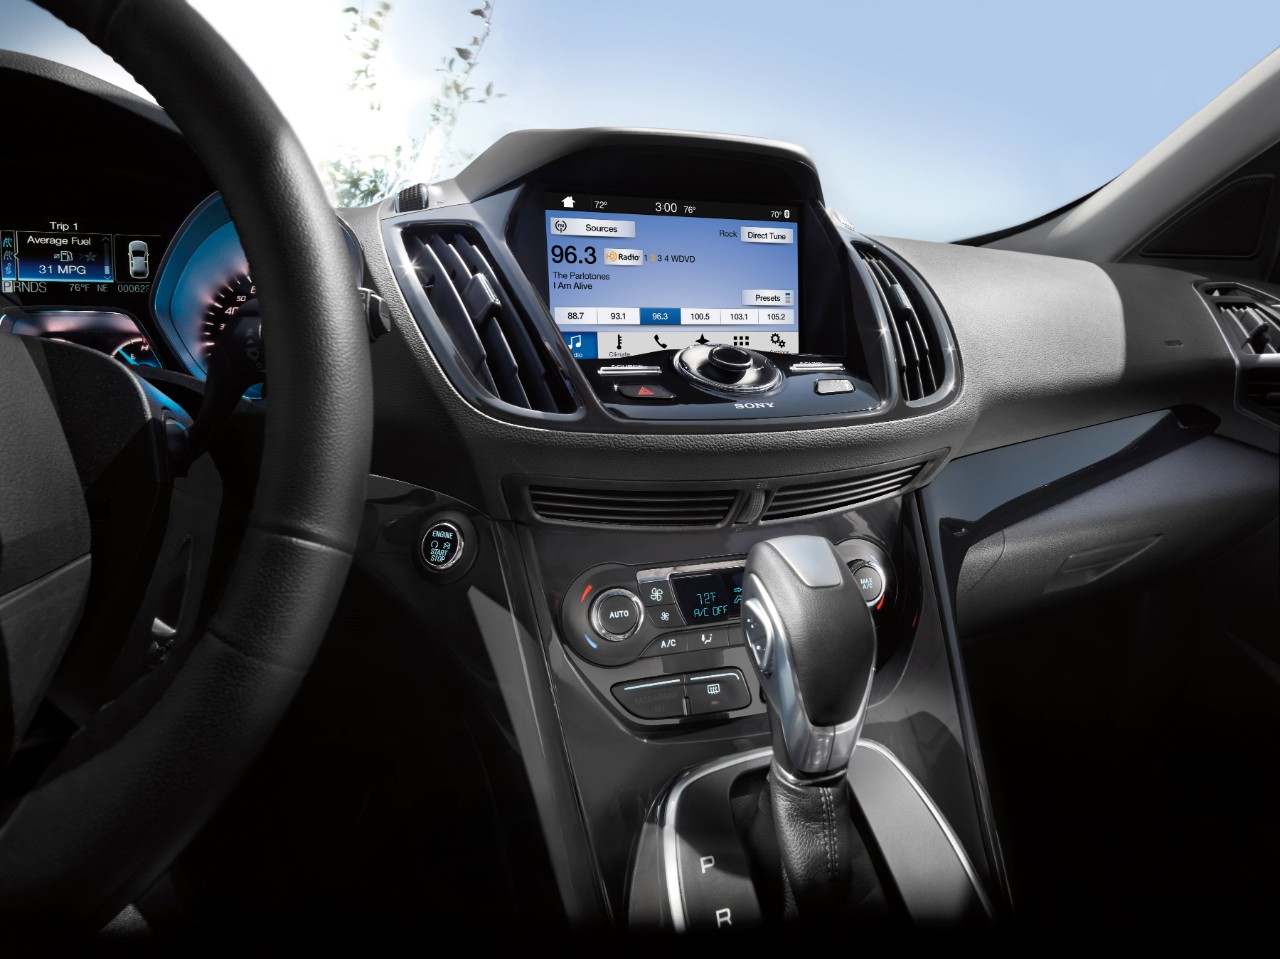 Ford announces SYNC 3 connectivity system – Will debut on Escape and Fiesta later this year